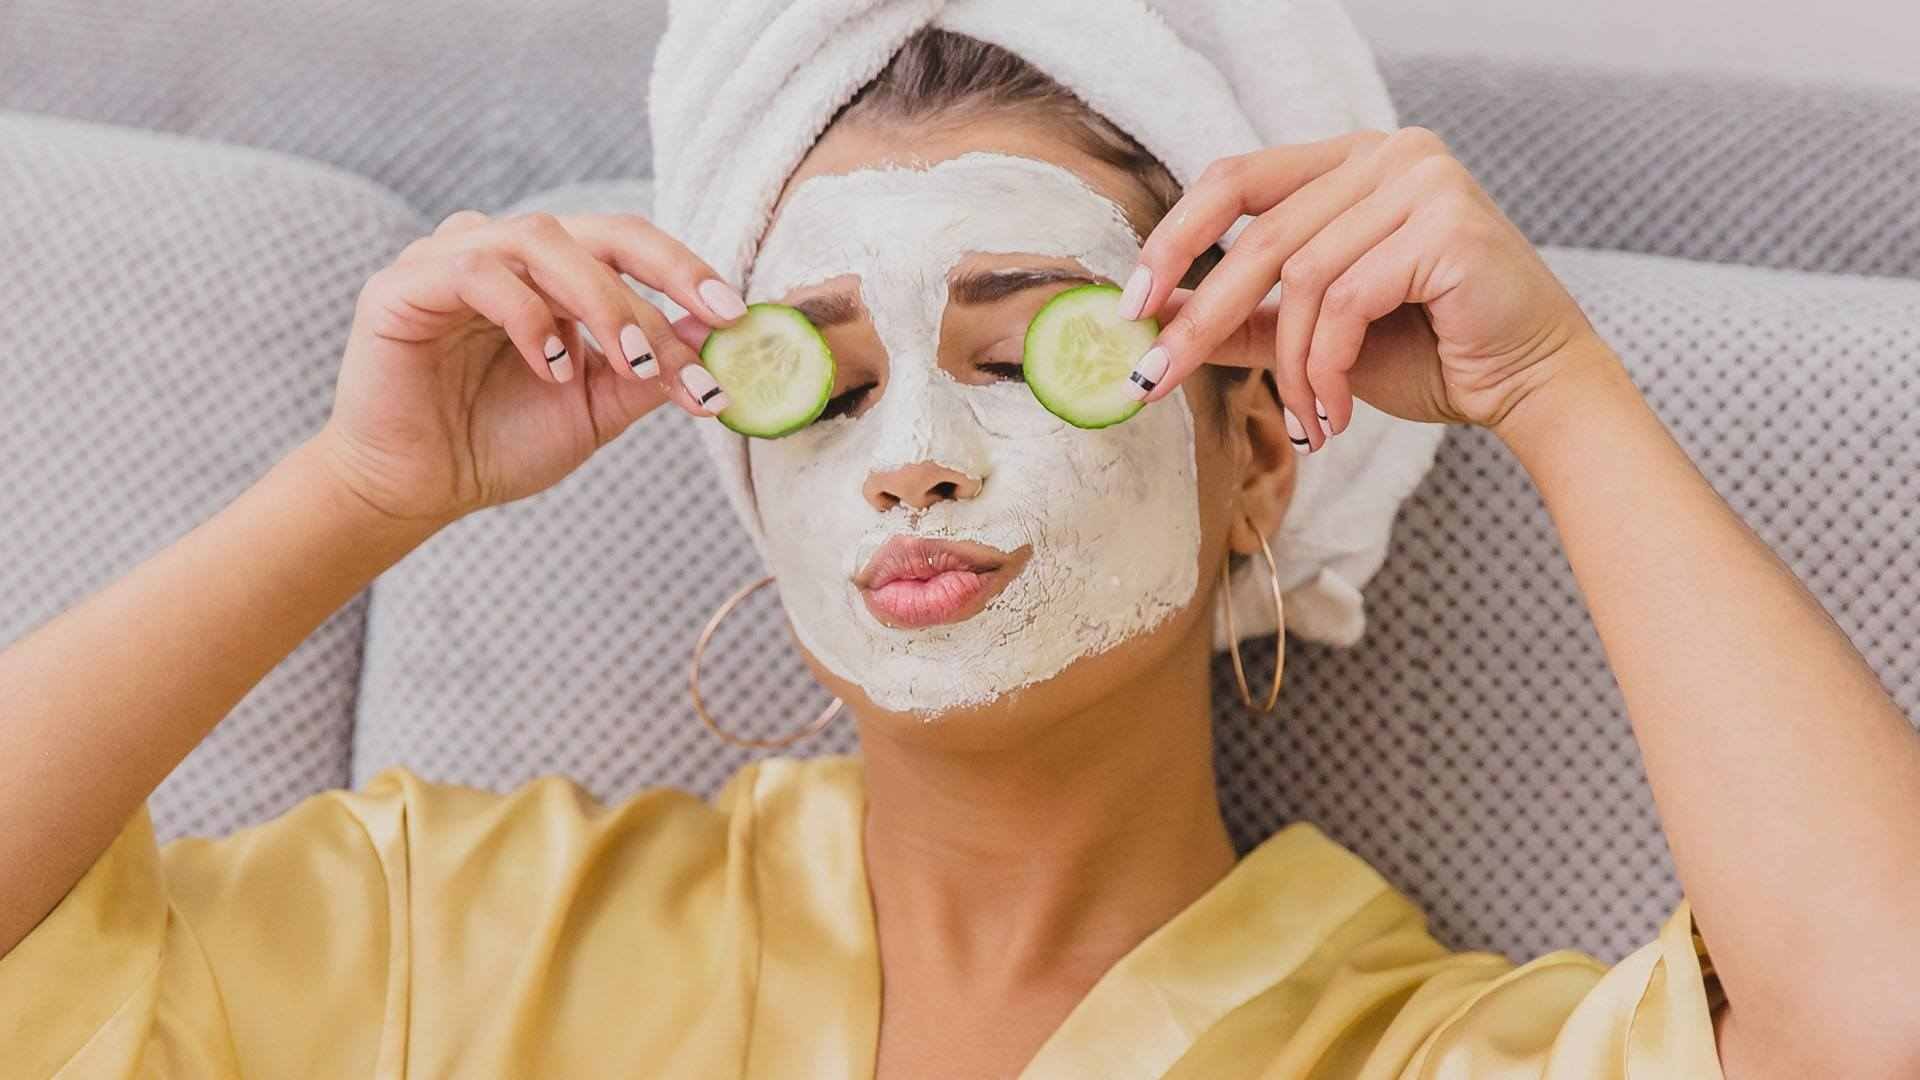 Loreal Paris Article Is Putting Cucumbers on Eyes Good for Your Skin D